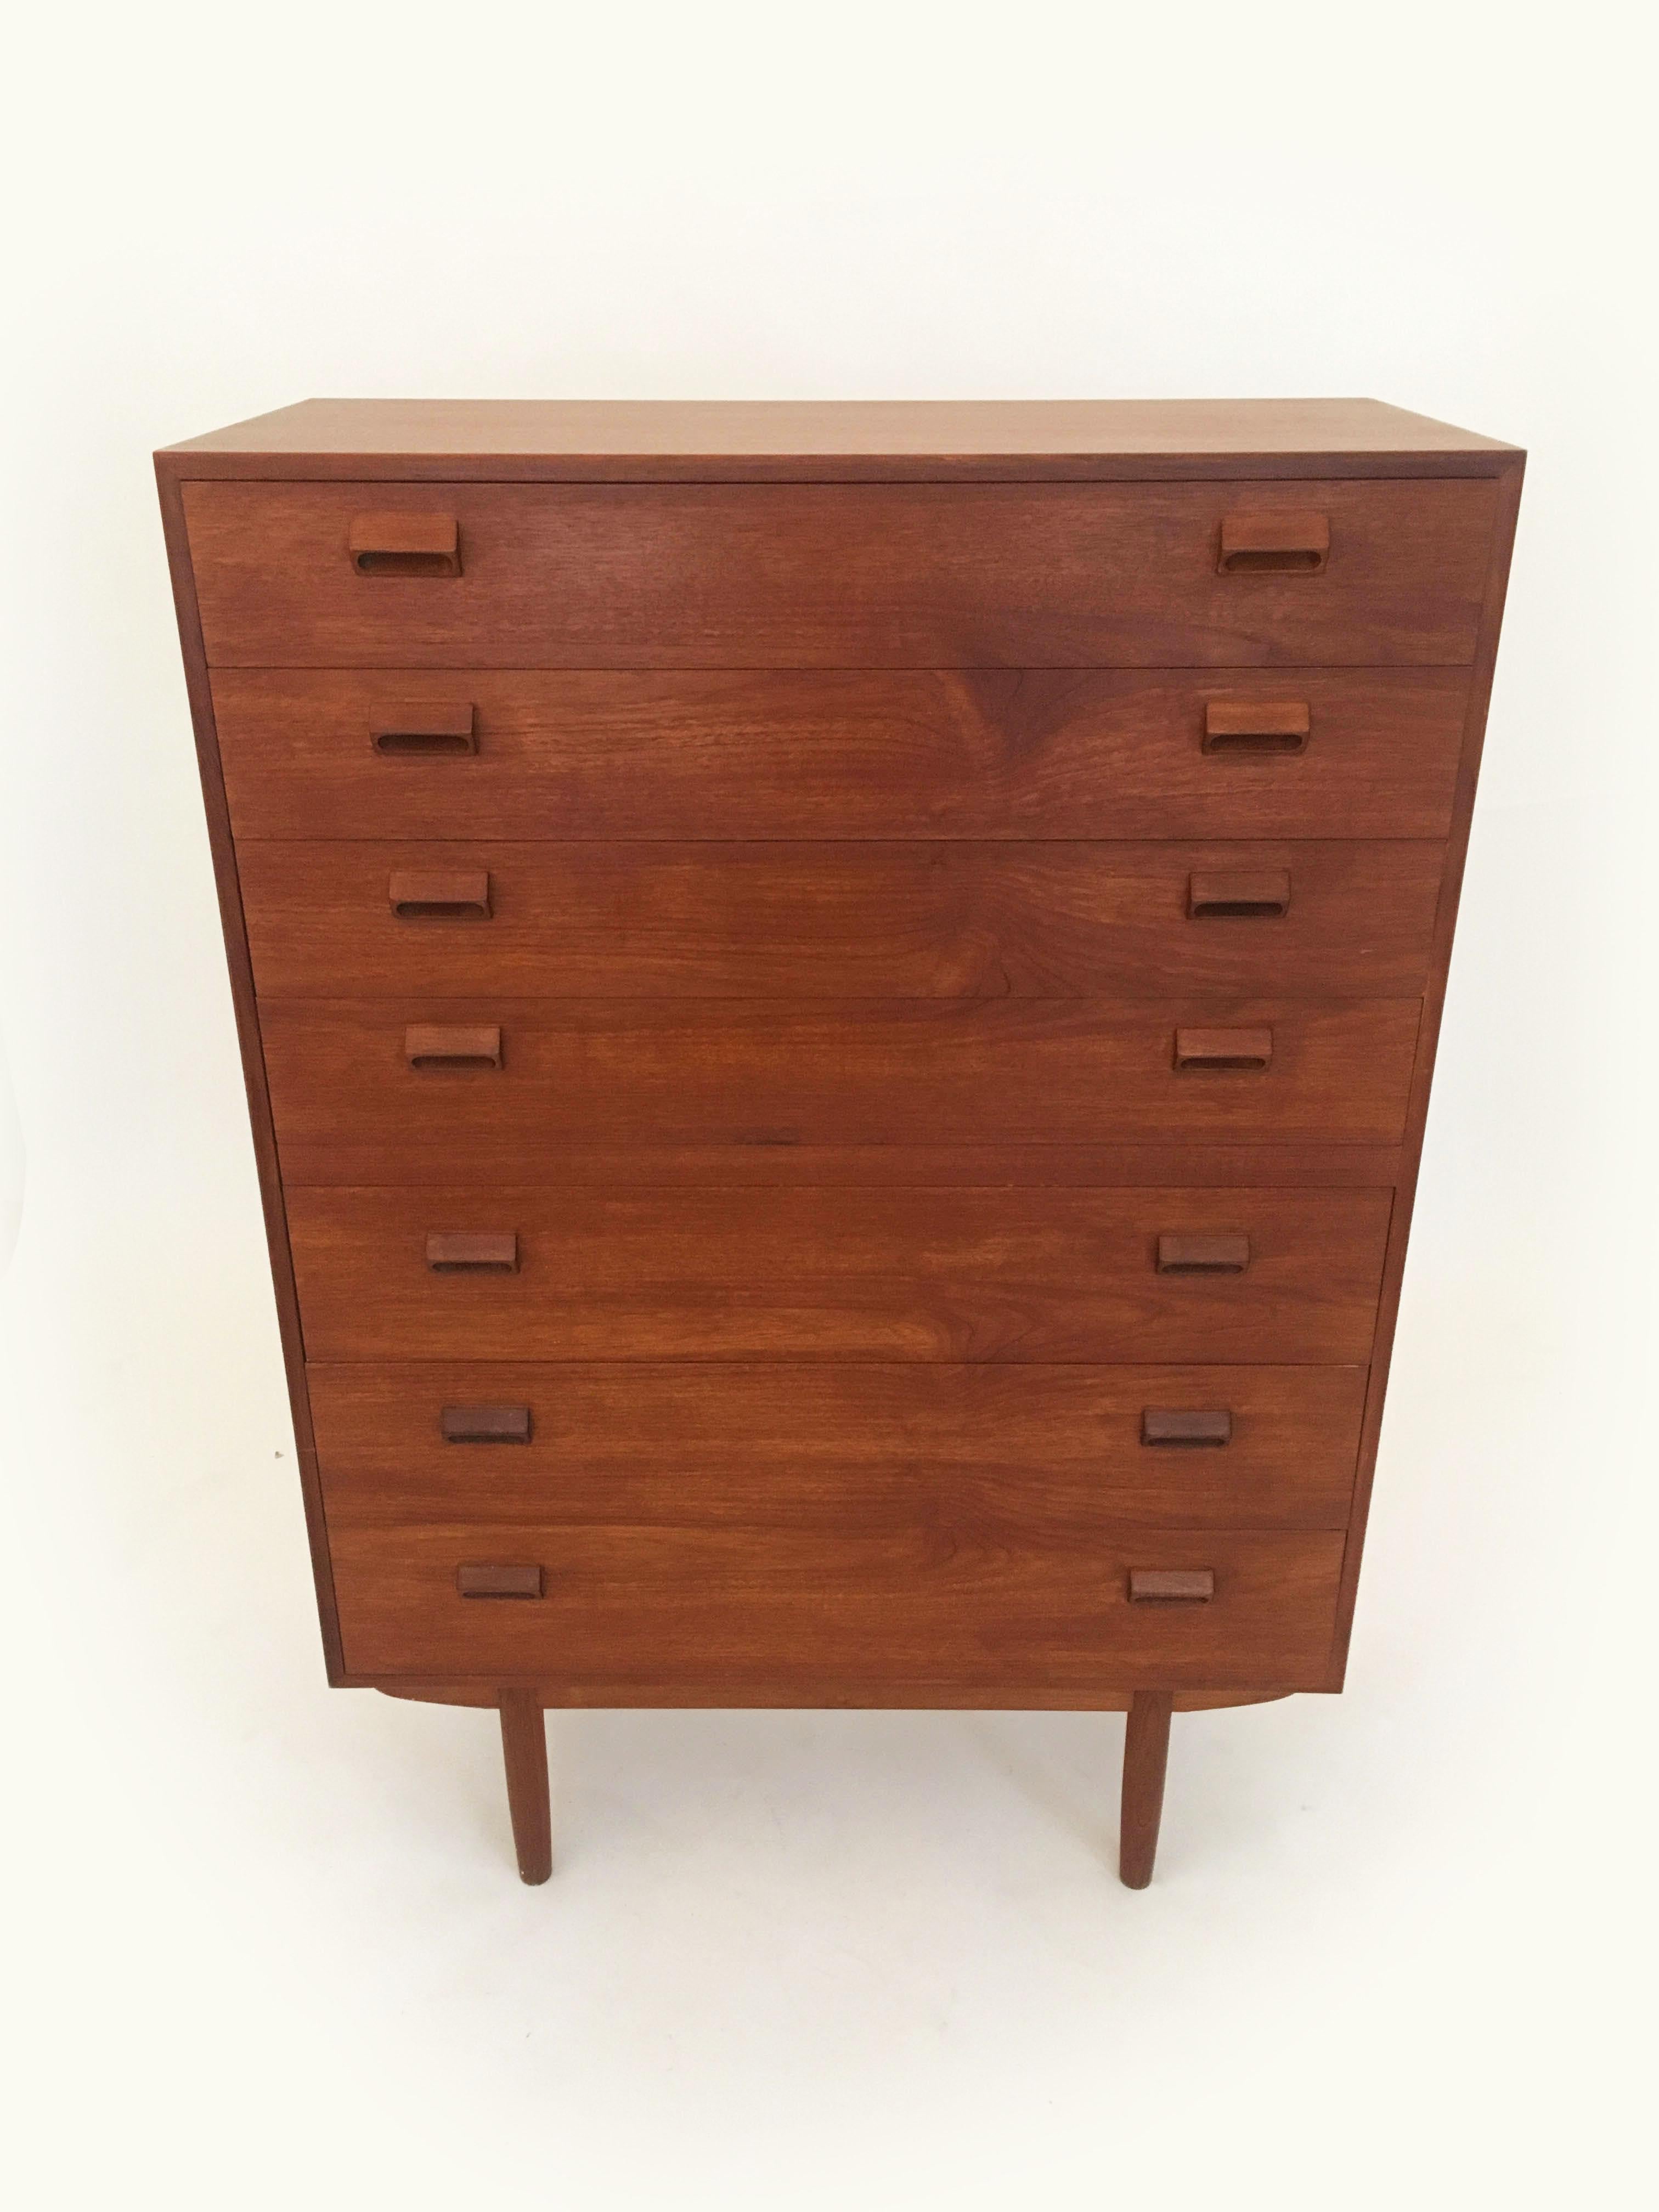 A tall Borge Mogensen teak seven drawer dresser chest of drawers on tapered teak dowel legs. Manufactured by Soborg Mobelfabrik Denmark 1960s. Out of the seven spacious drawers, three are outfitted with a customized black insert, very individual